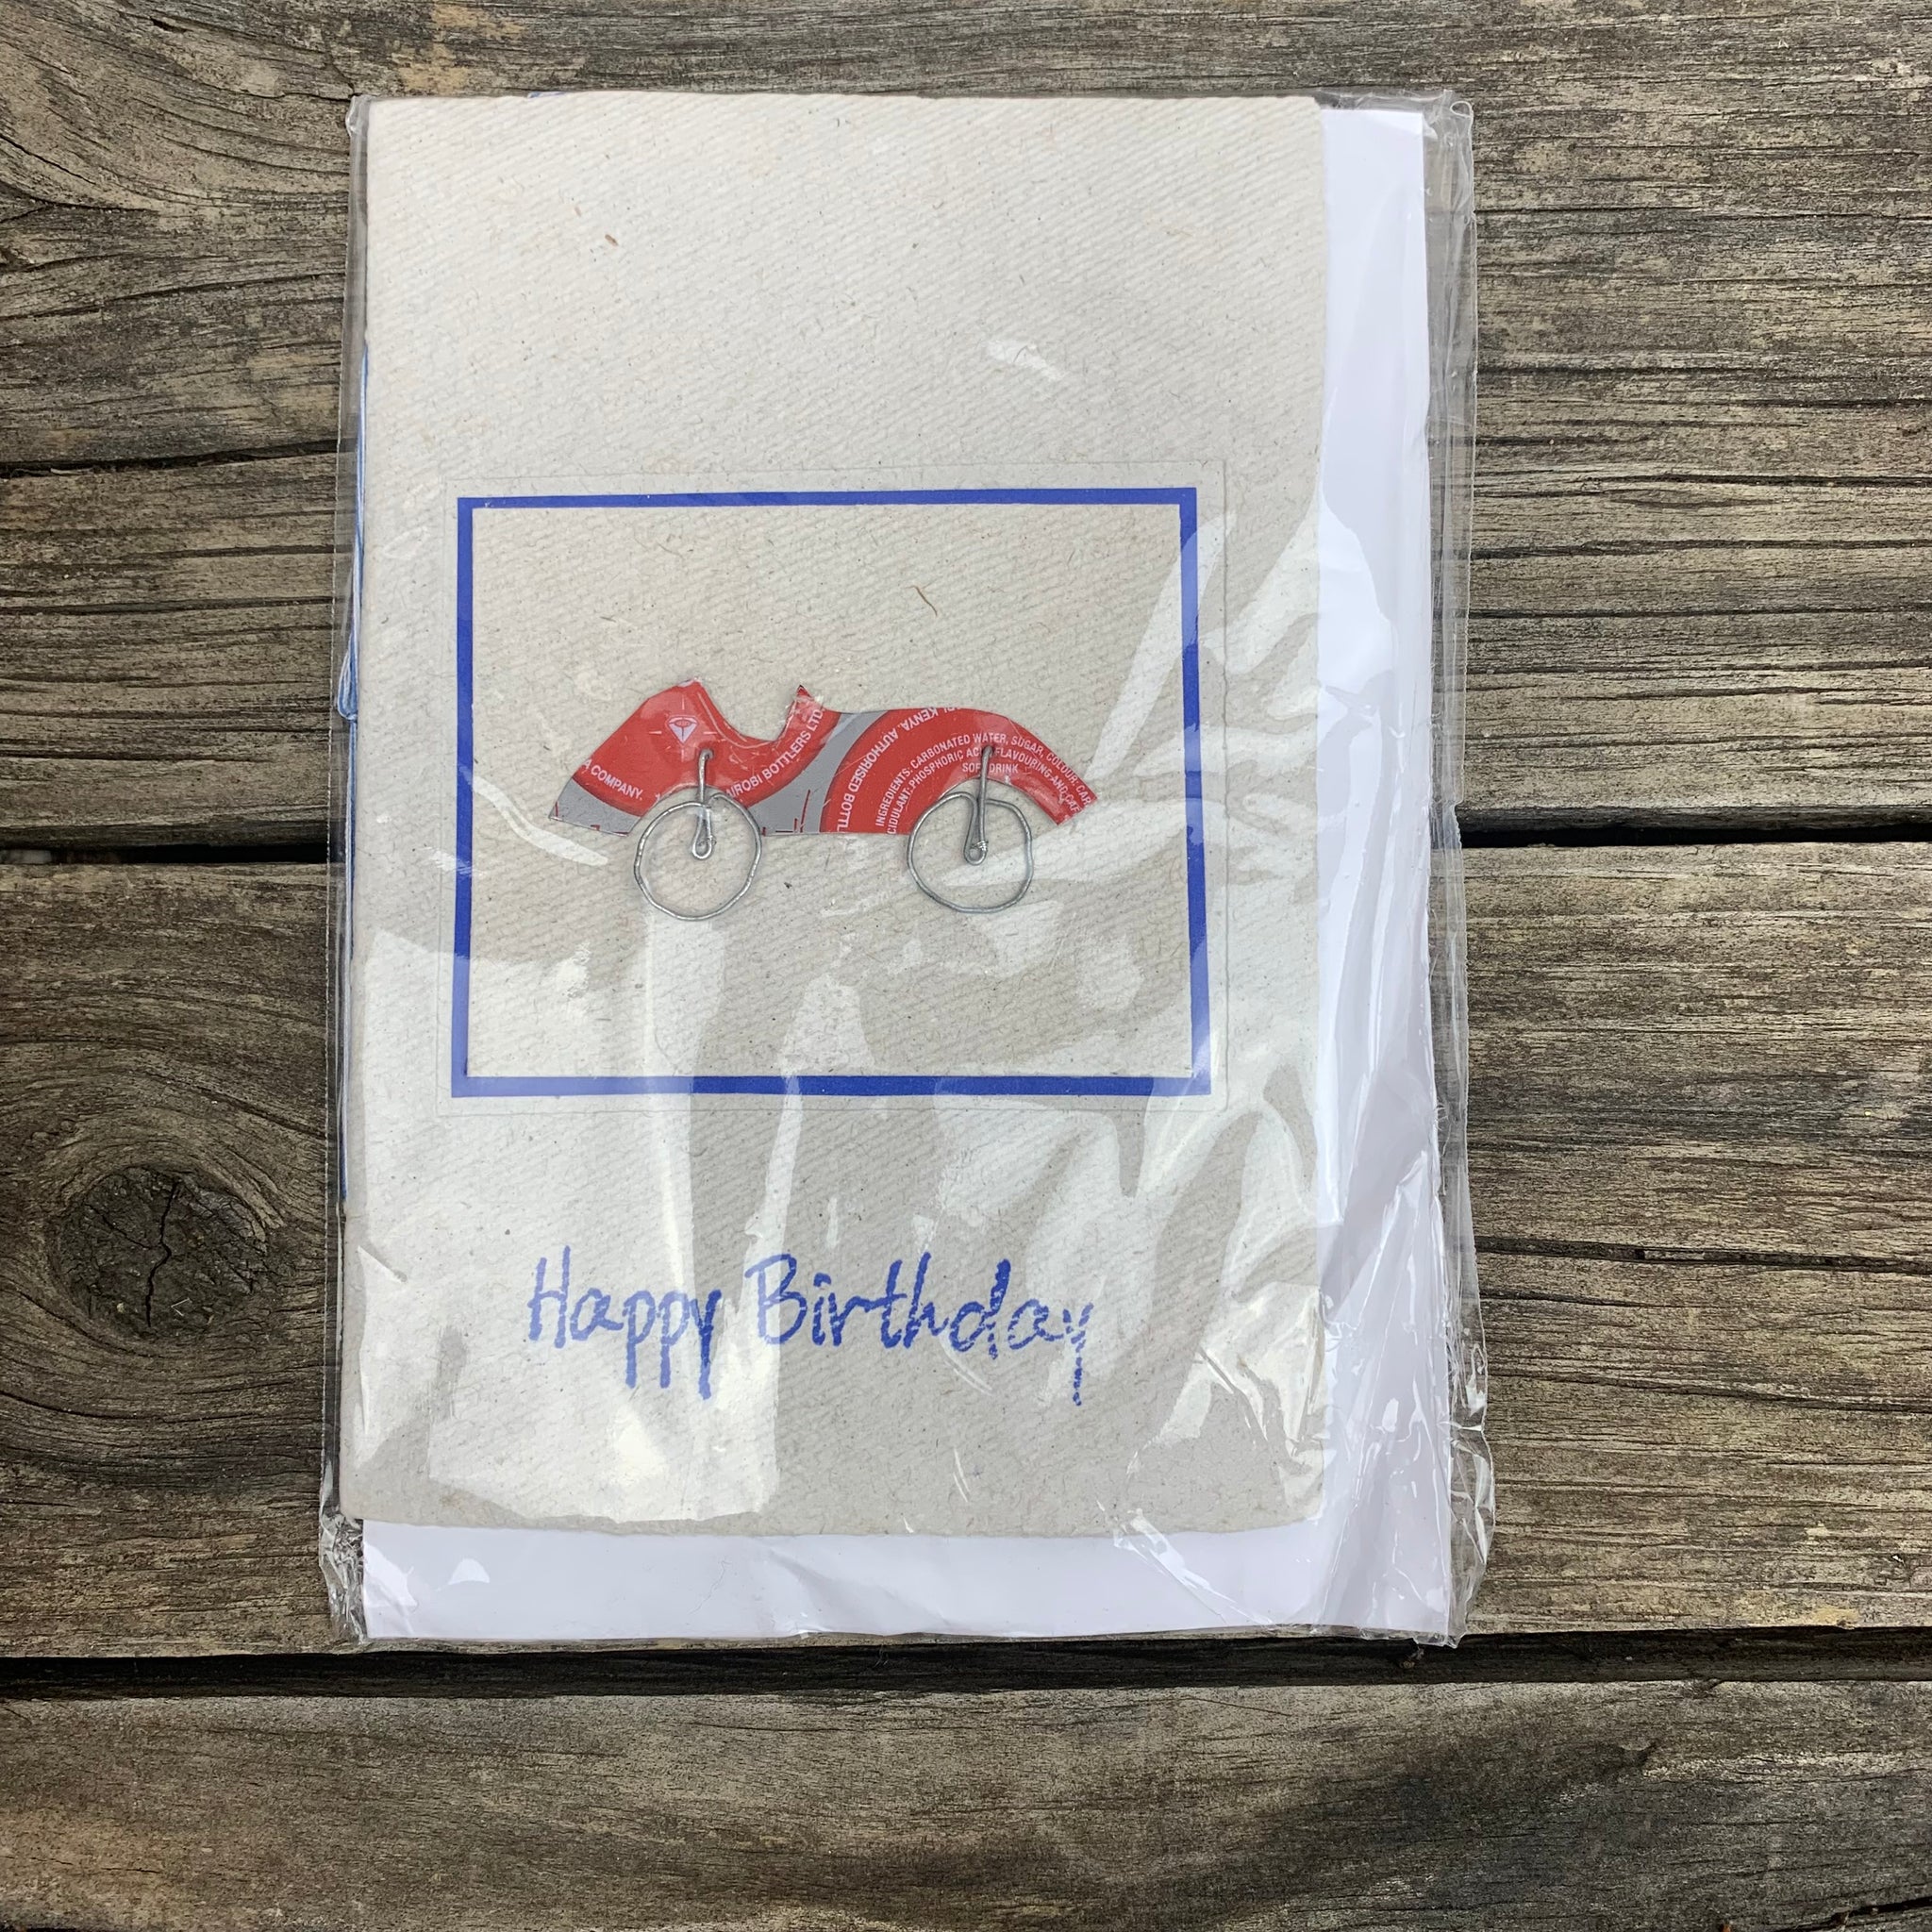 White handmade paper greeting card that displays 'Happy Birthday' in blue cursive letters. In the centre of the card is a car made out of metal wire and recycled metalframed by a blue border